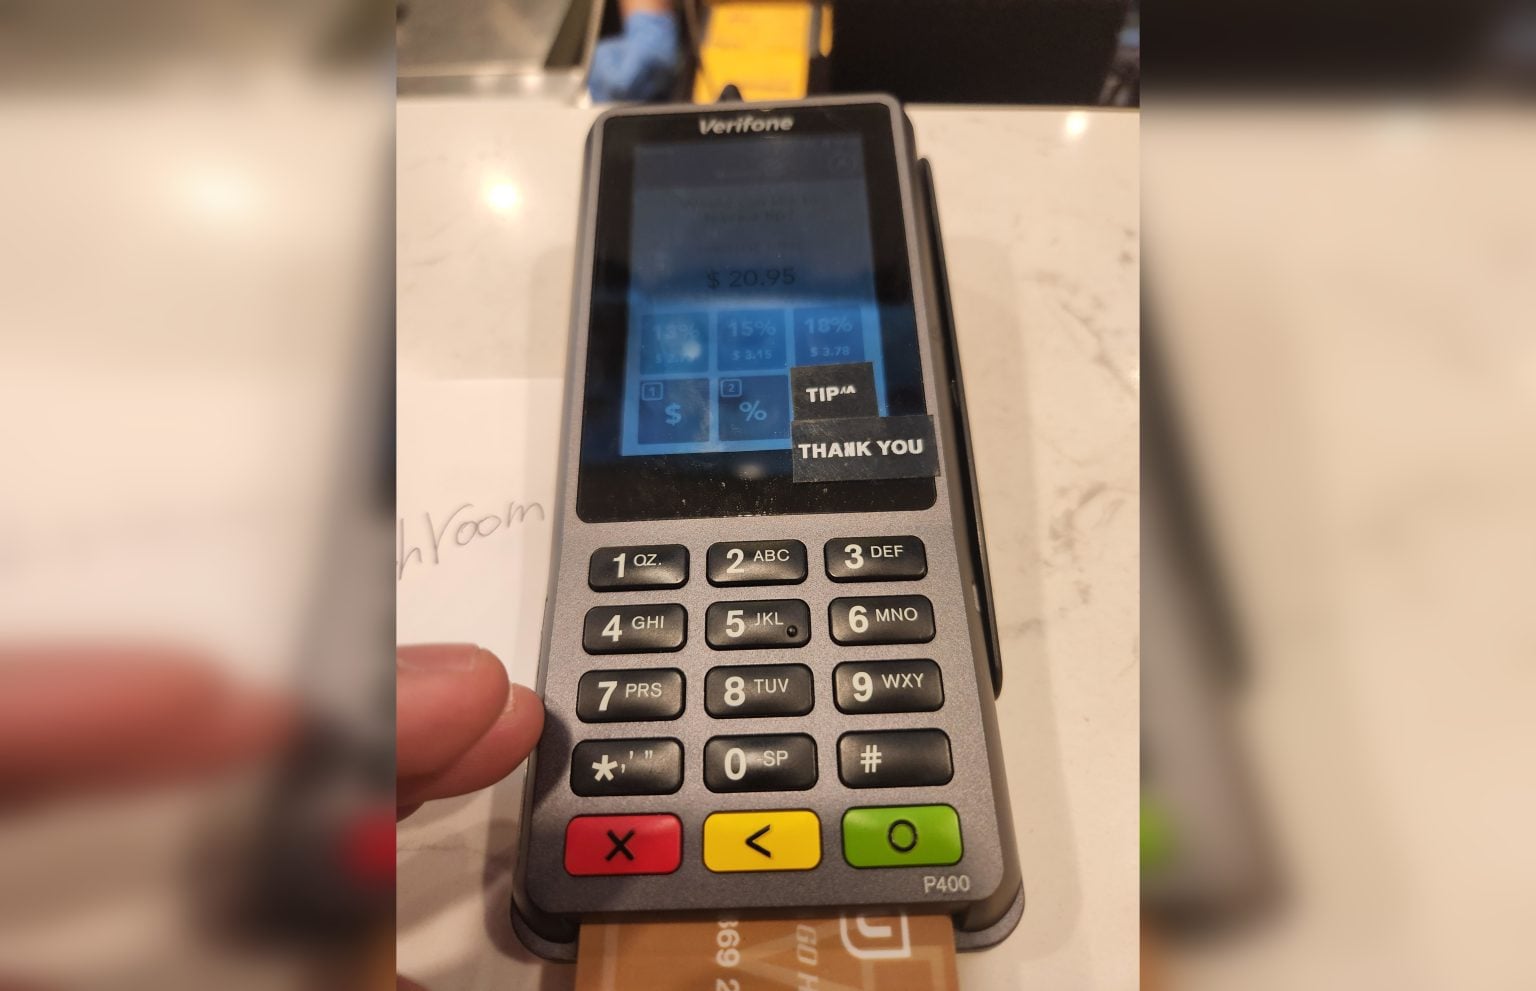 Burnaby restaurant slammed for covering ‘no tip’ option on payment terminal